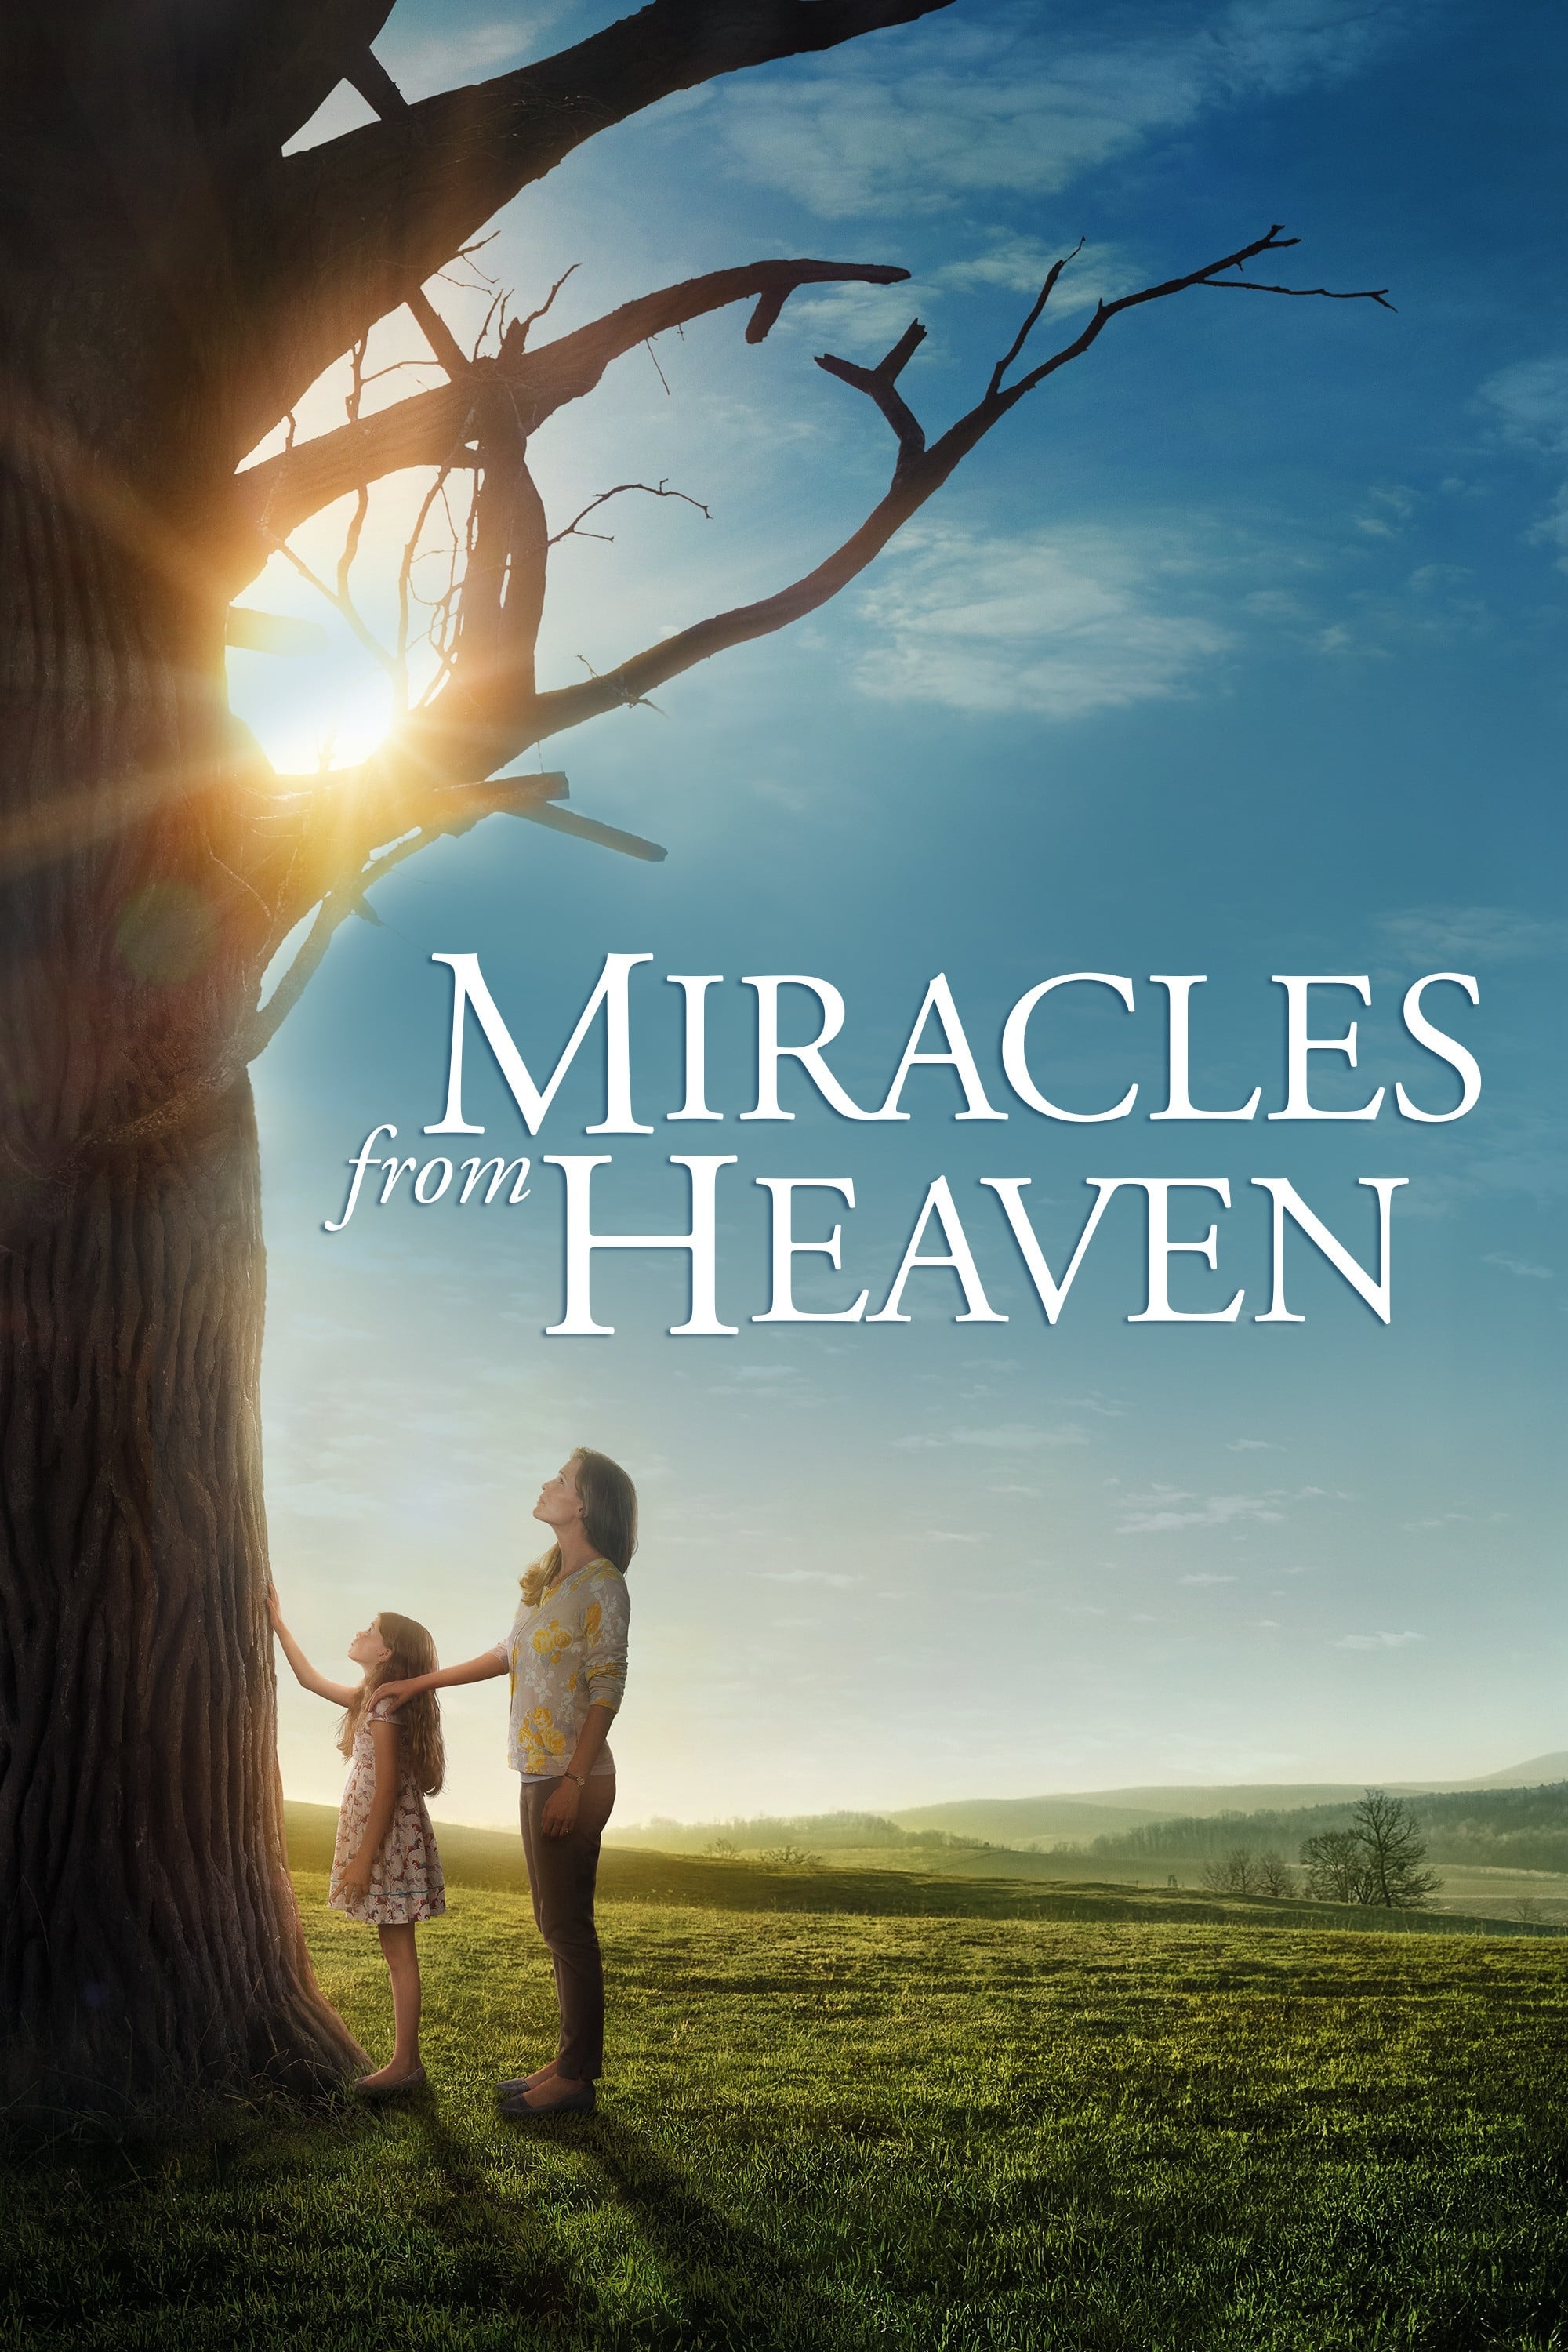 Miracles from Heaven, Full movie online, Plex streaming, Emotional experience, 2000x3000 HD Handy